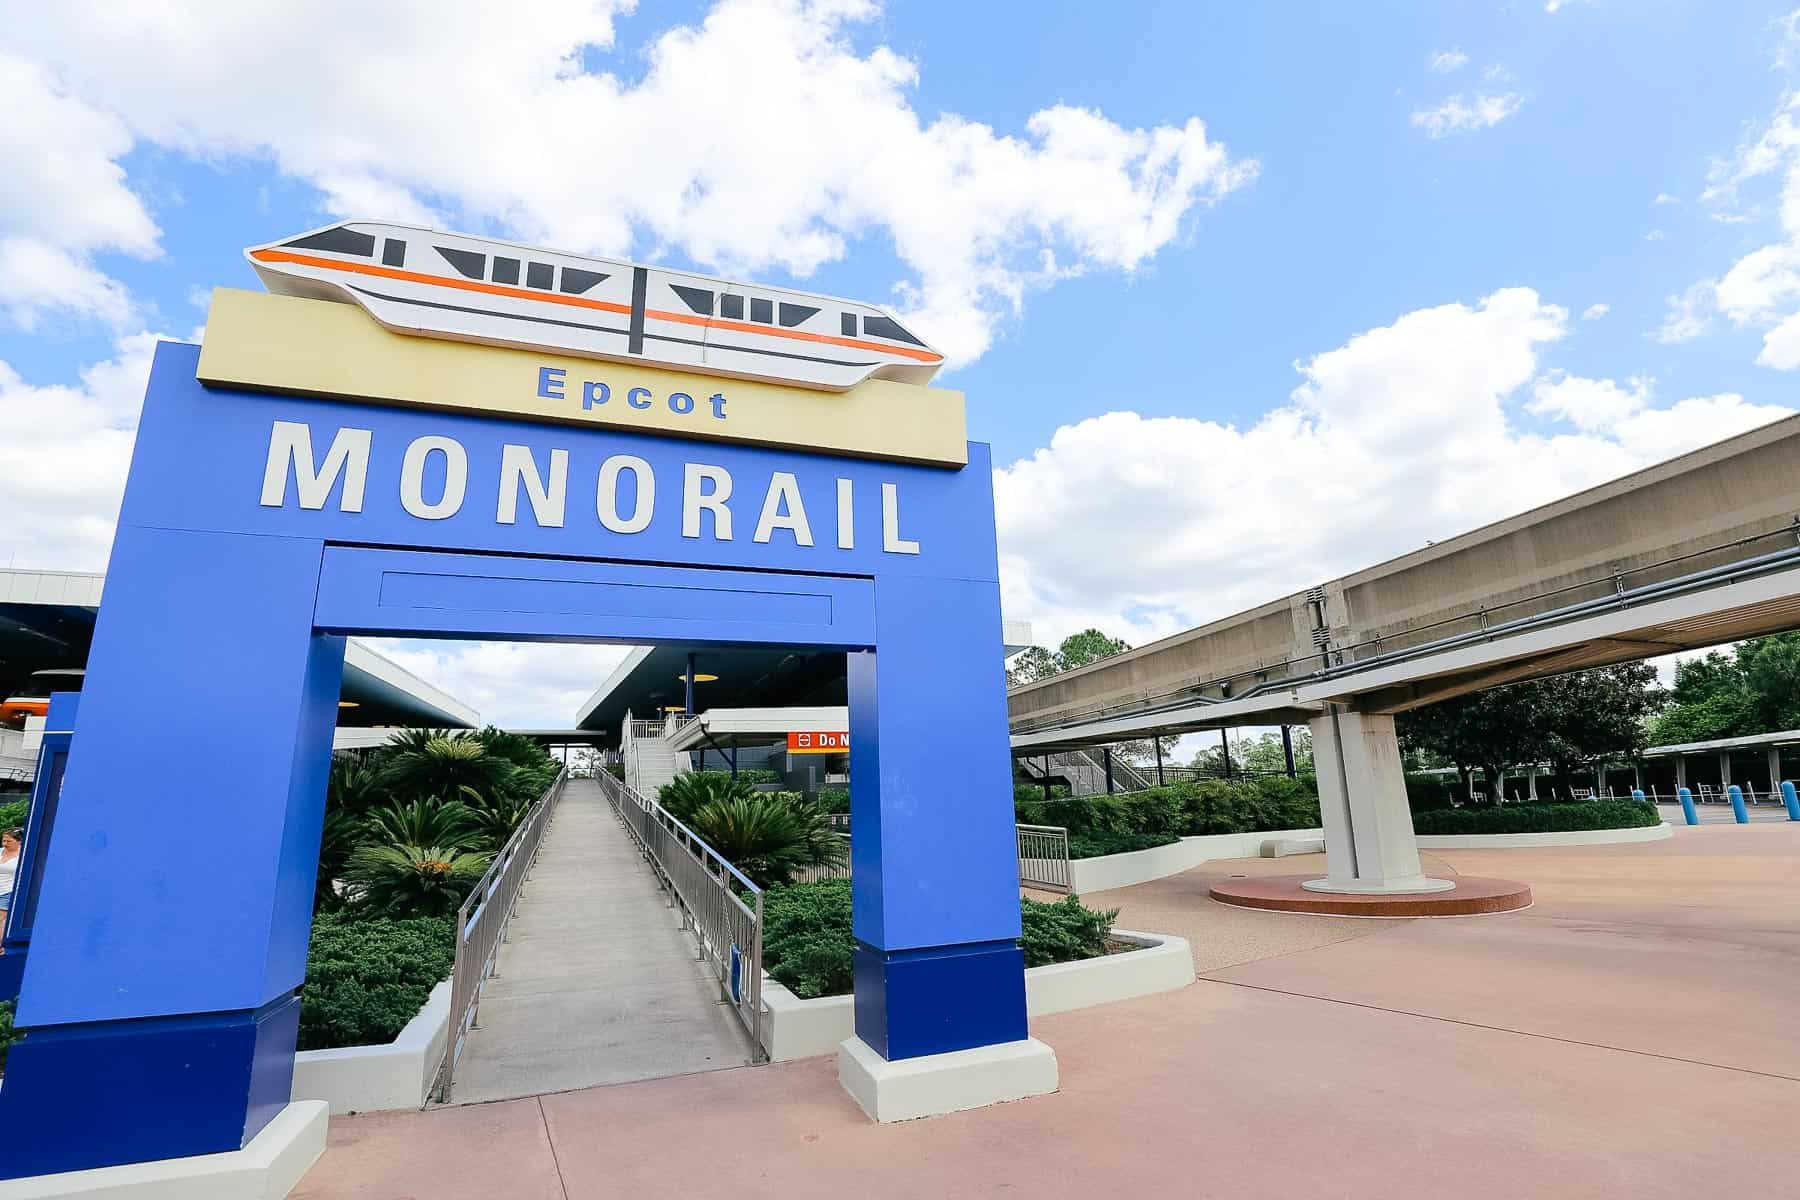 walkway up to the monorail at the Transportation and Ticket Center 